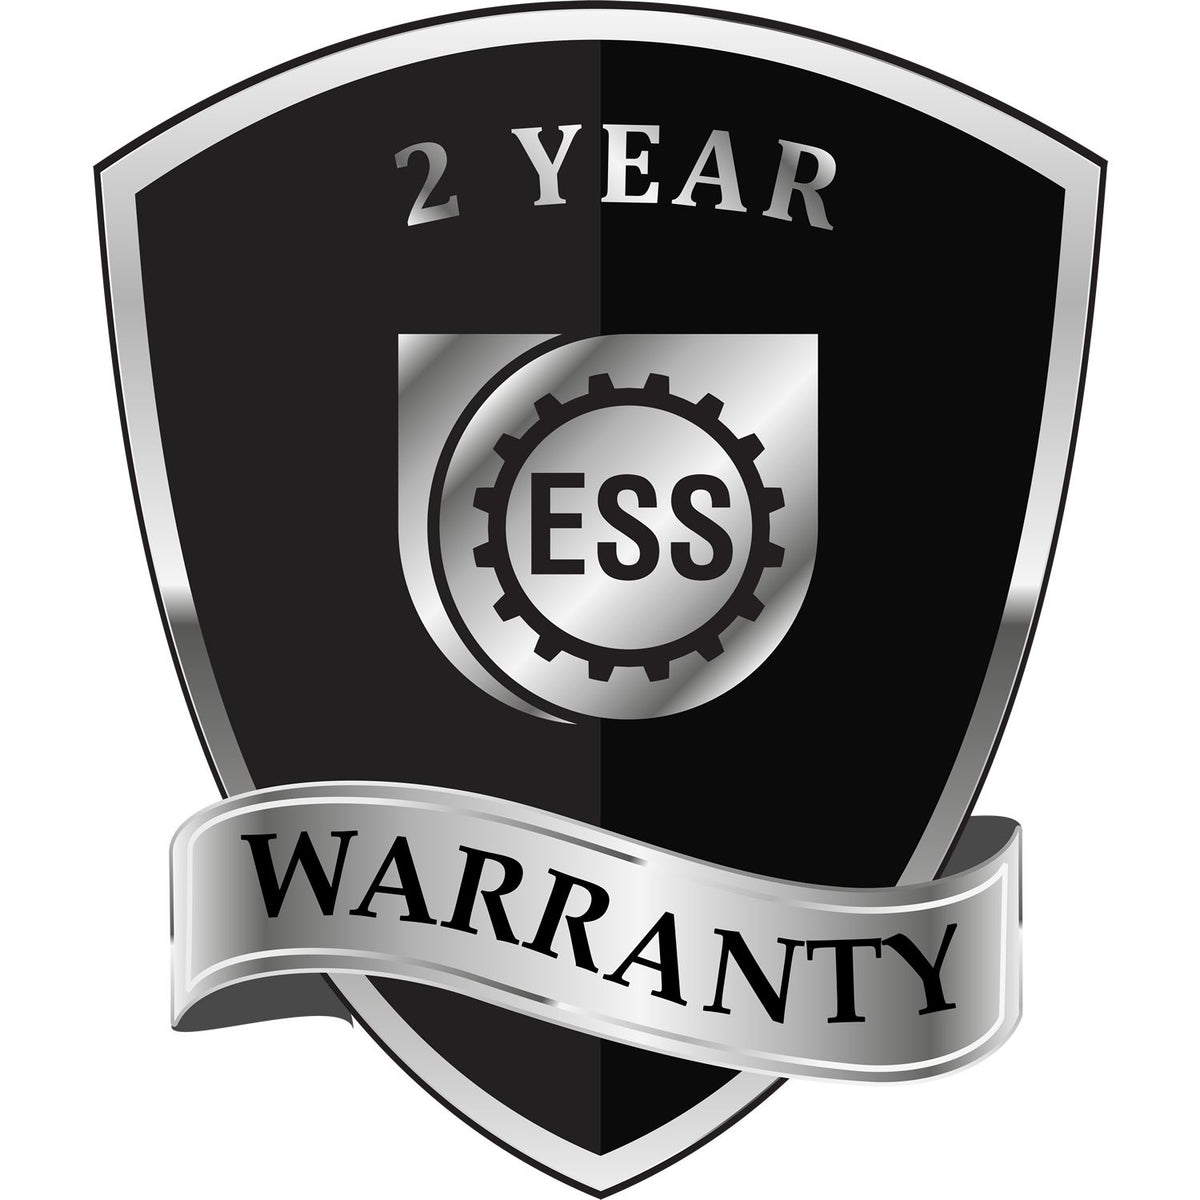 A black and silver badge or emblem showing warranty information for the State of Virginia Extended Long Reach Geologist Seal